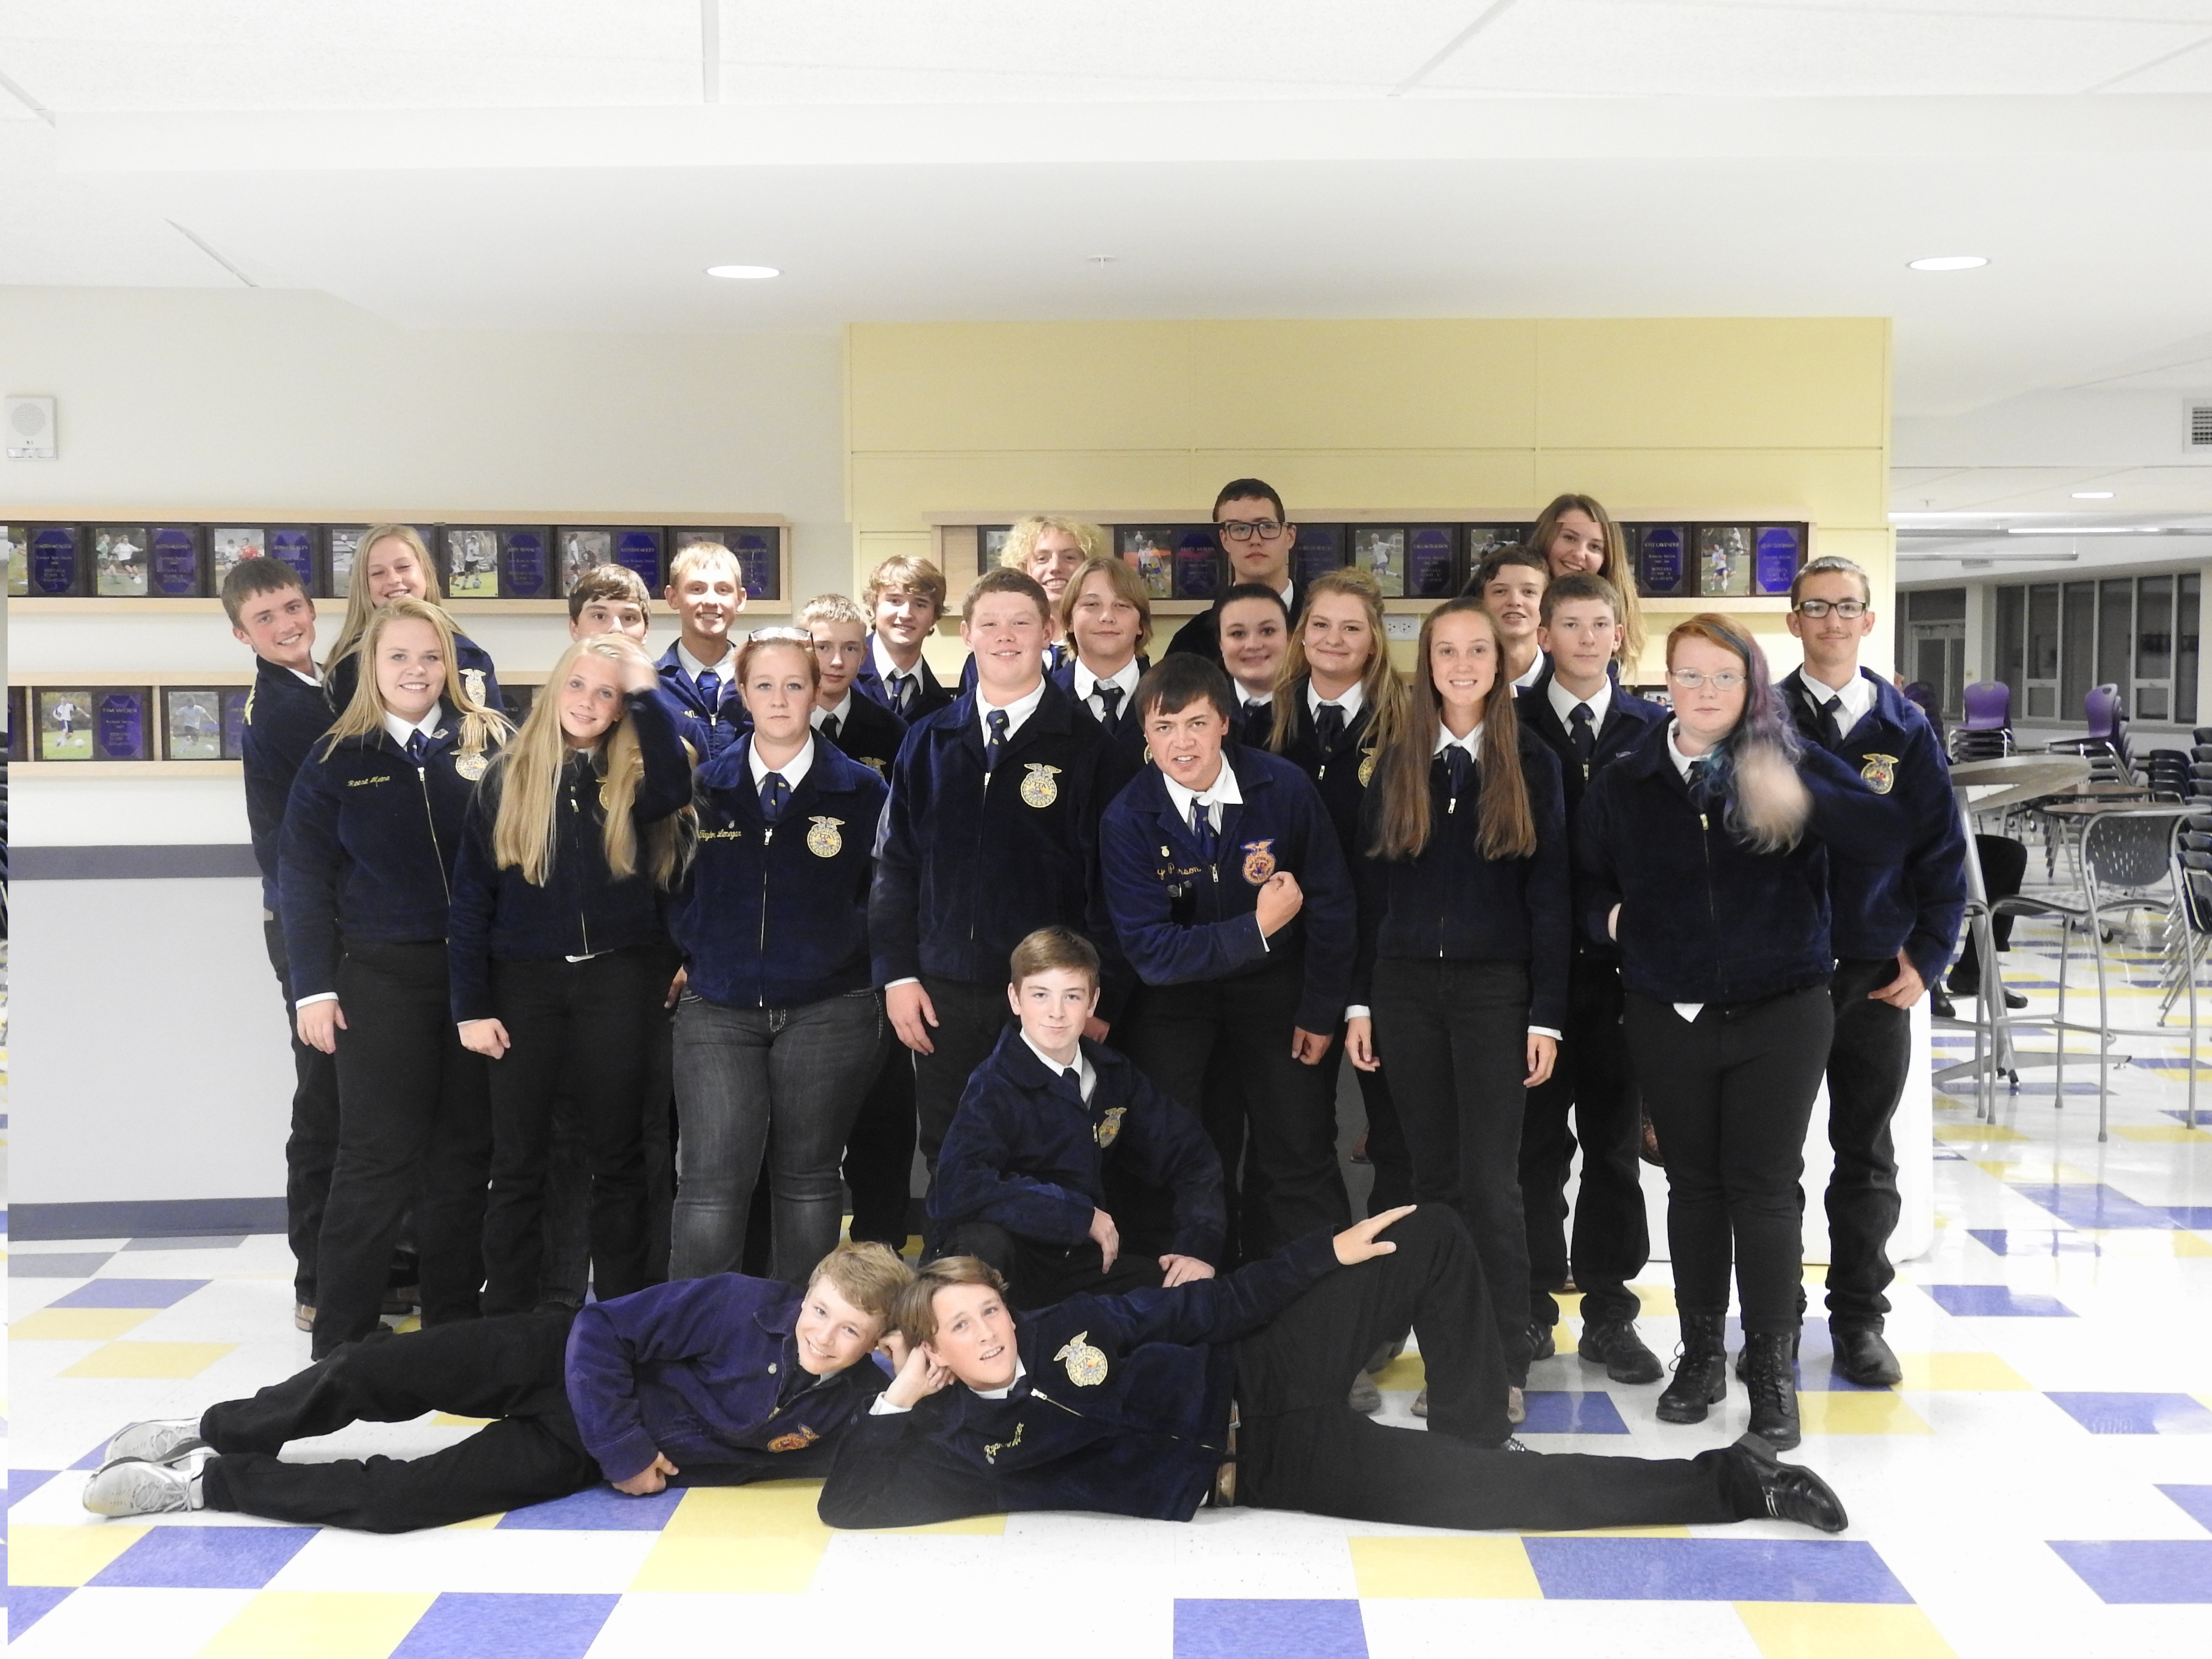 A group photo of the FFA team posing in the school hallway